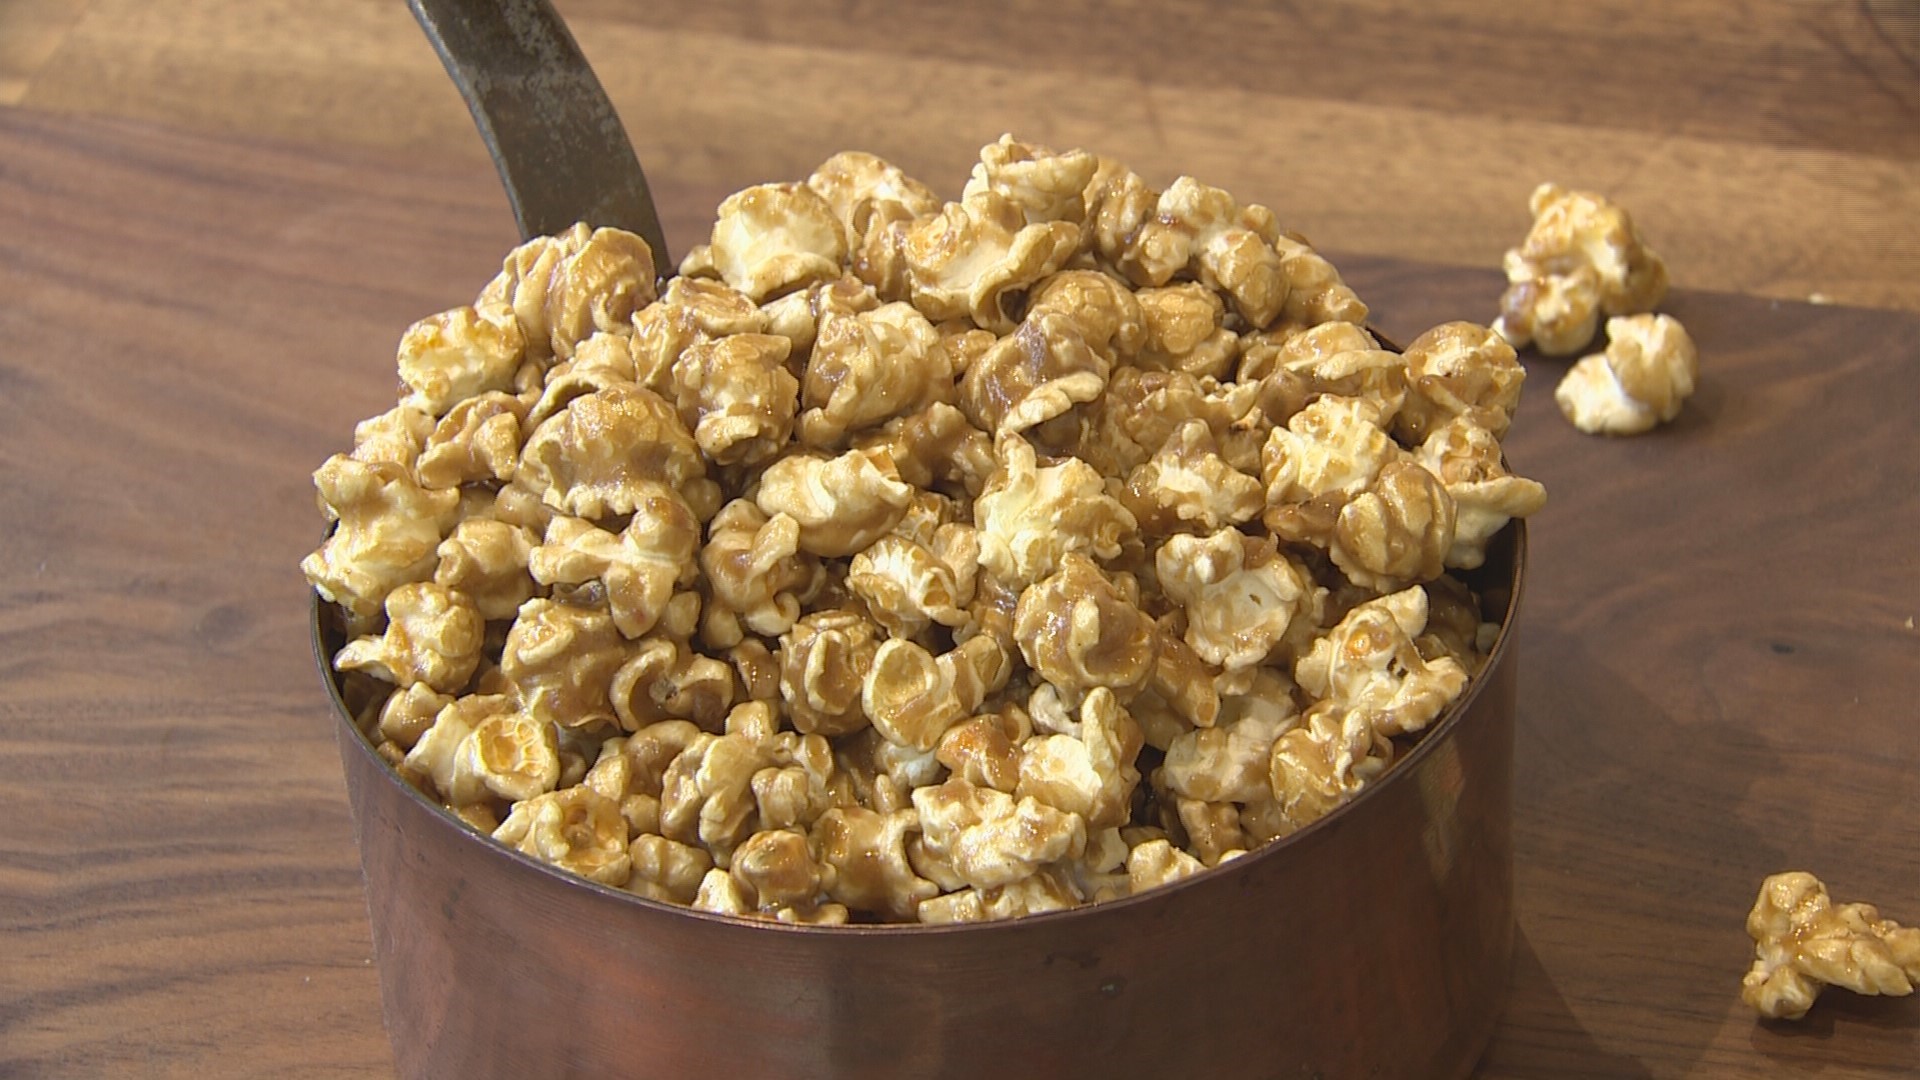 Cobb's Popcorn in Pike Place Market limits customers to two bags per visit